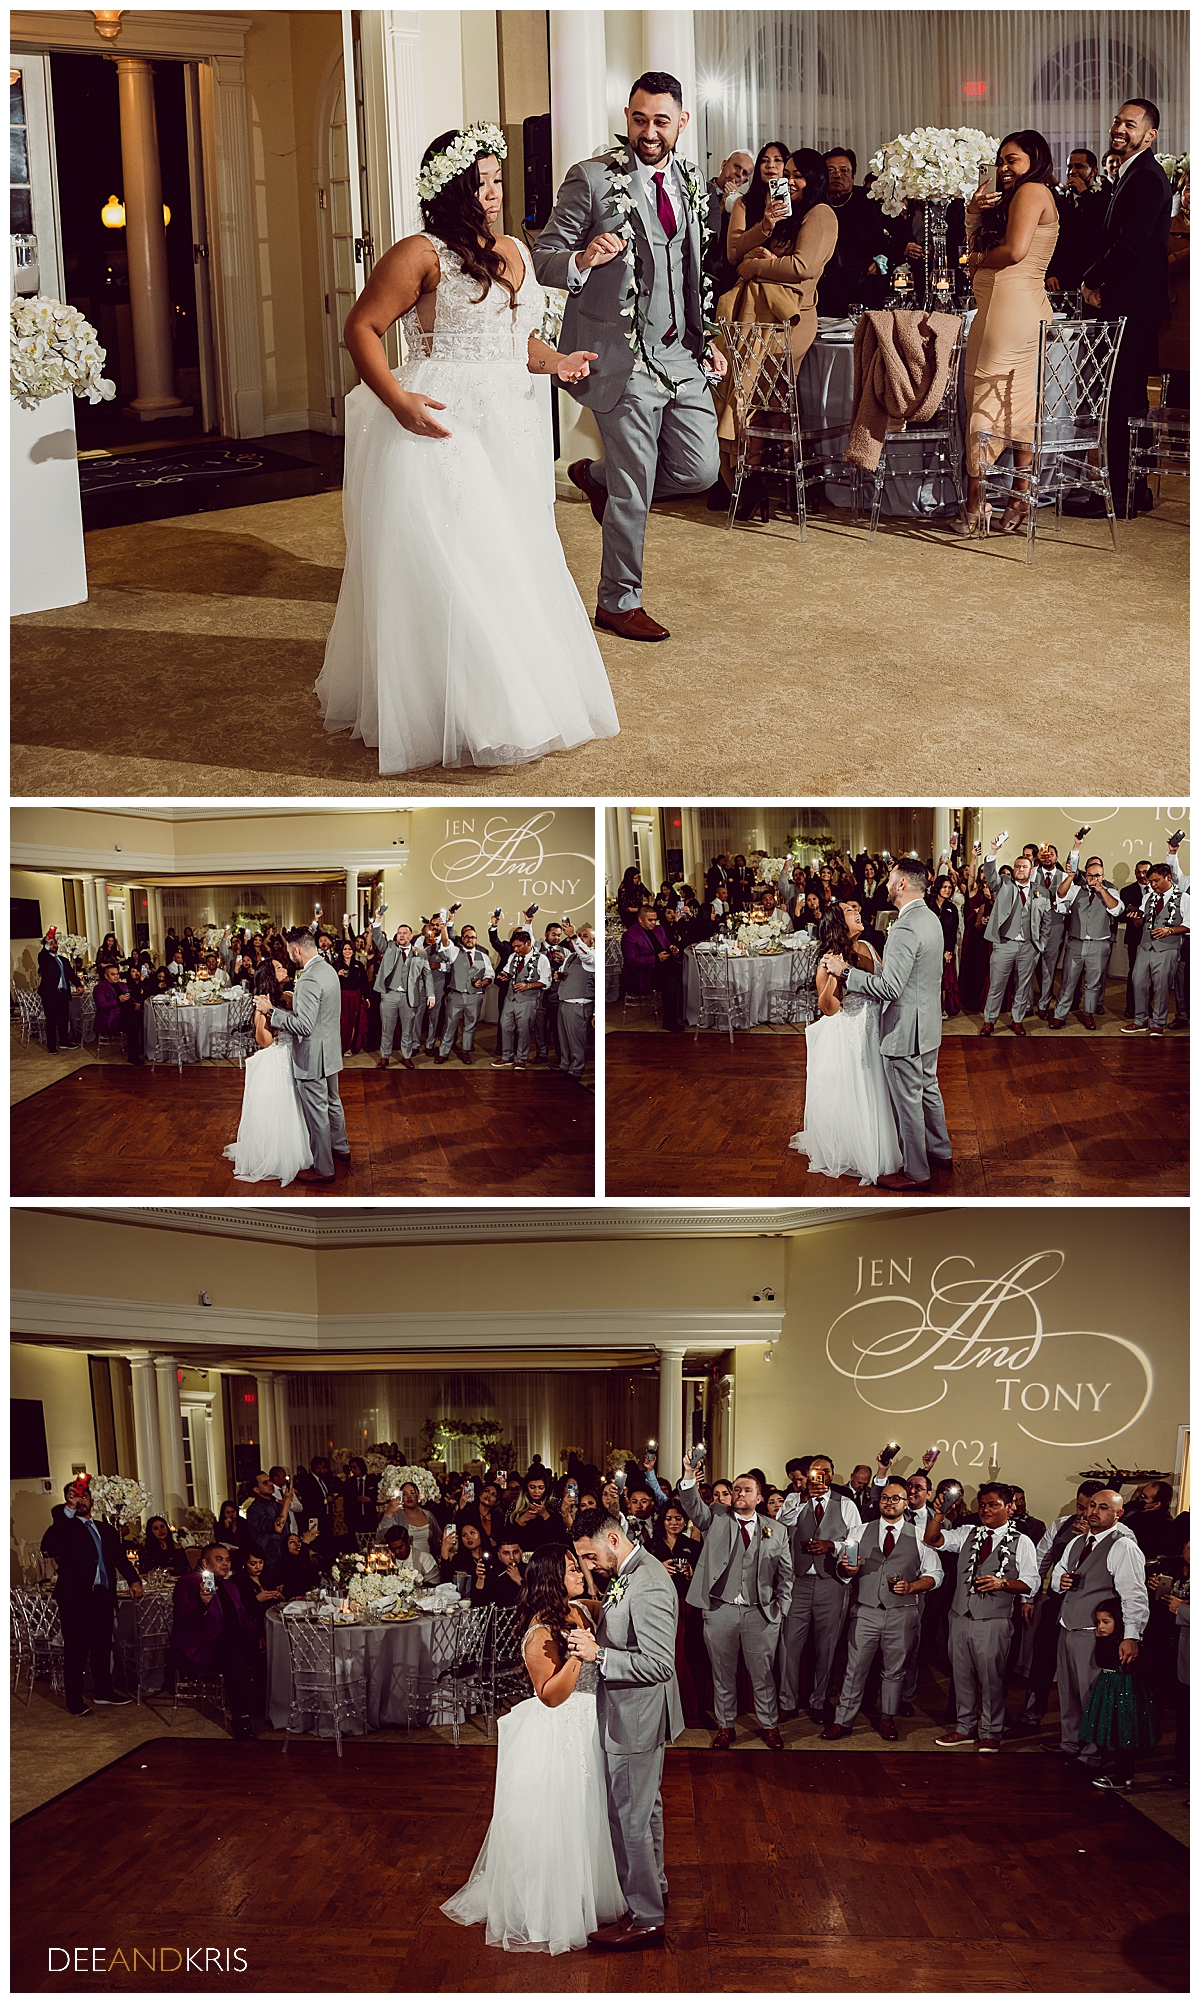 Four images of couple's first dance.